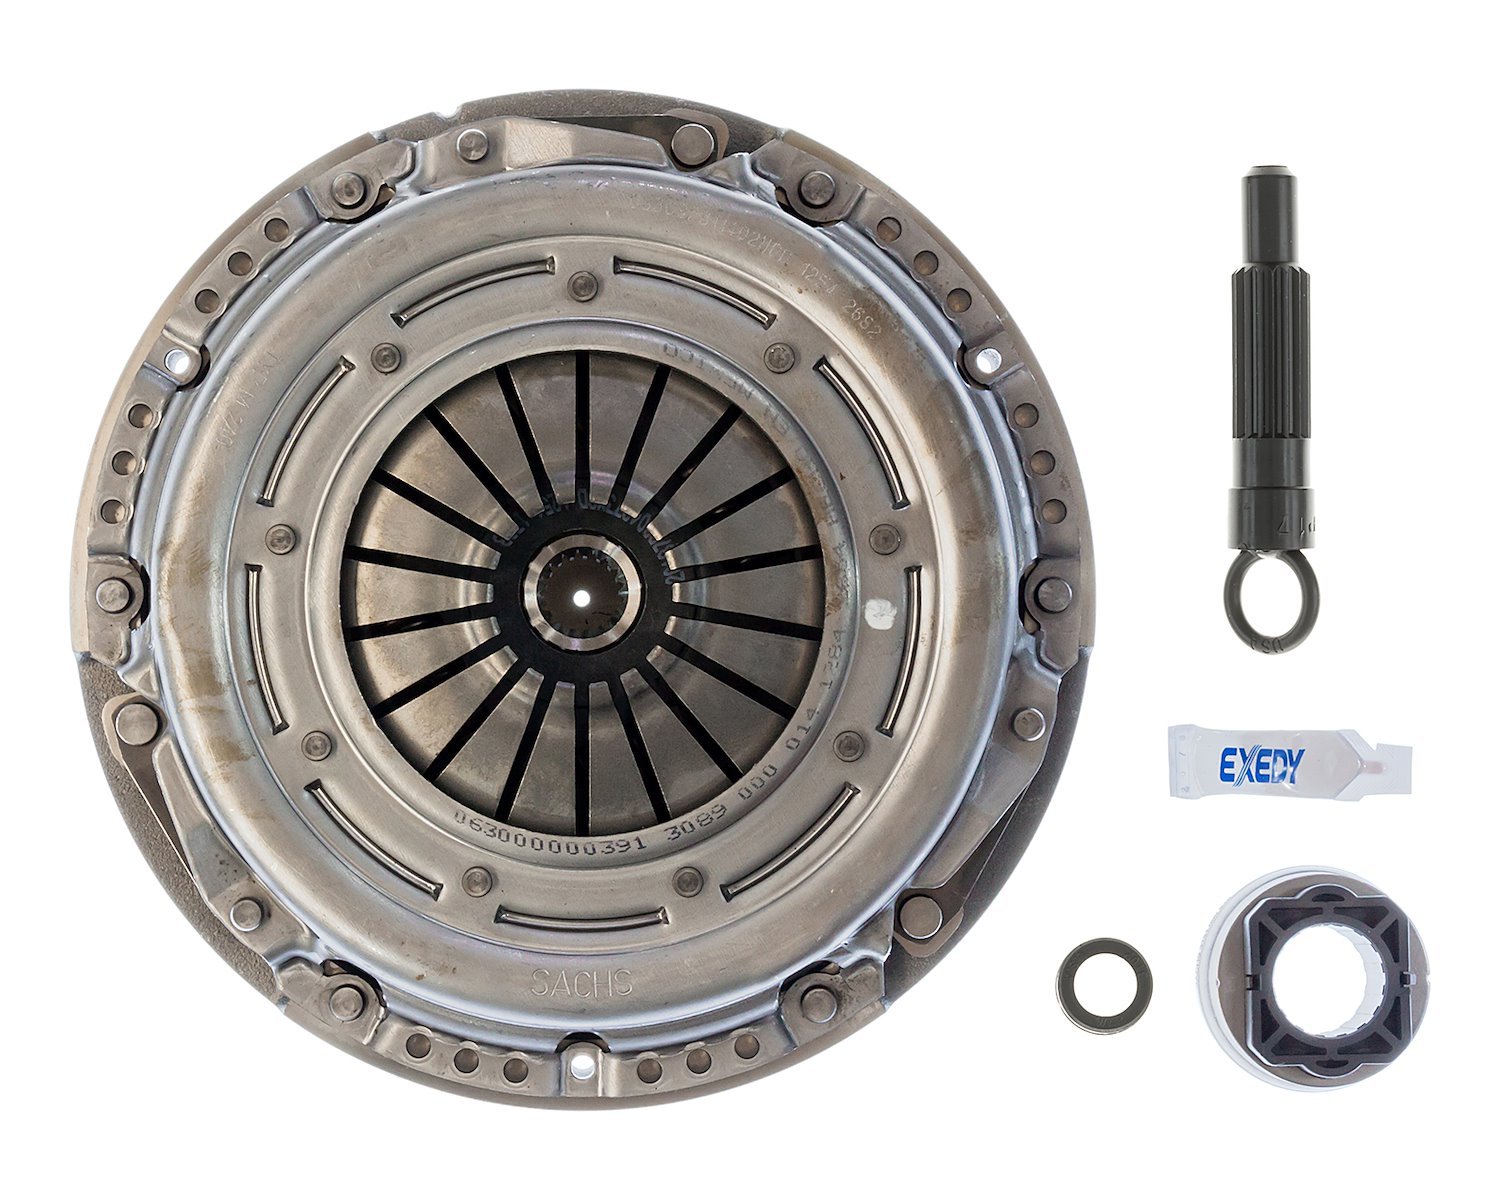 CRK1001 OEM Replacement Transmission Clutch and Flywheel Kit, 2003-2005 Dodge Neon L4